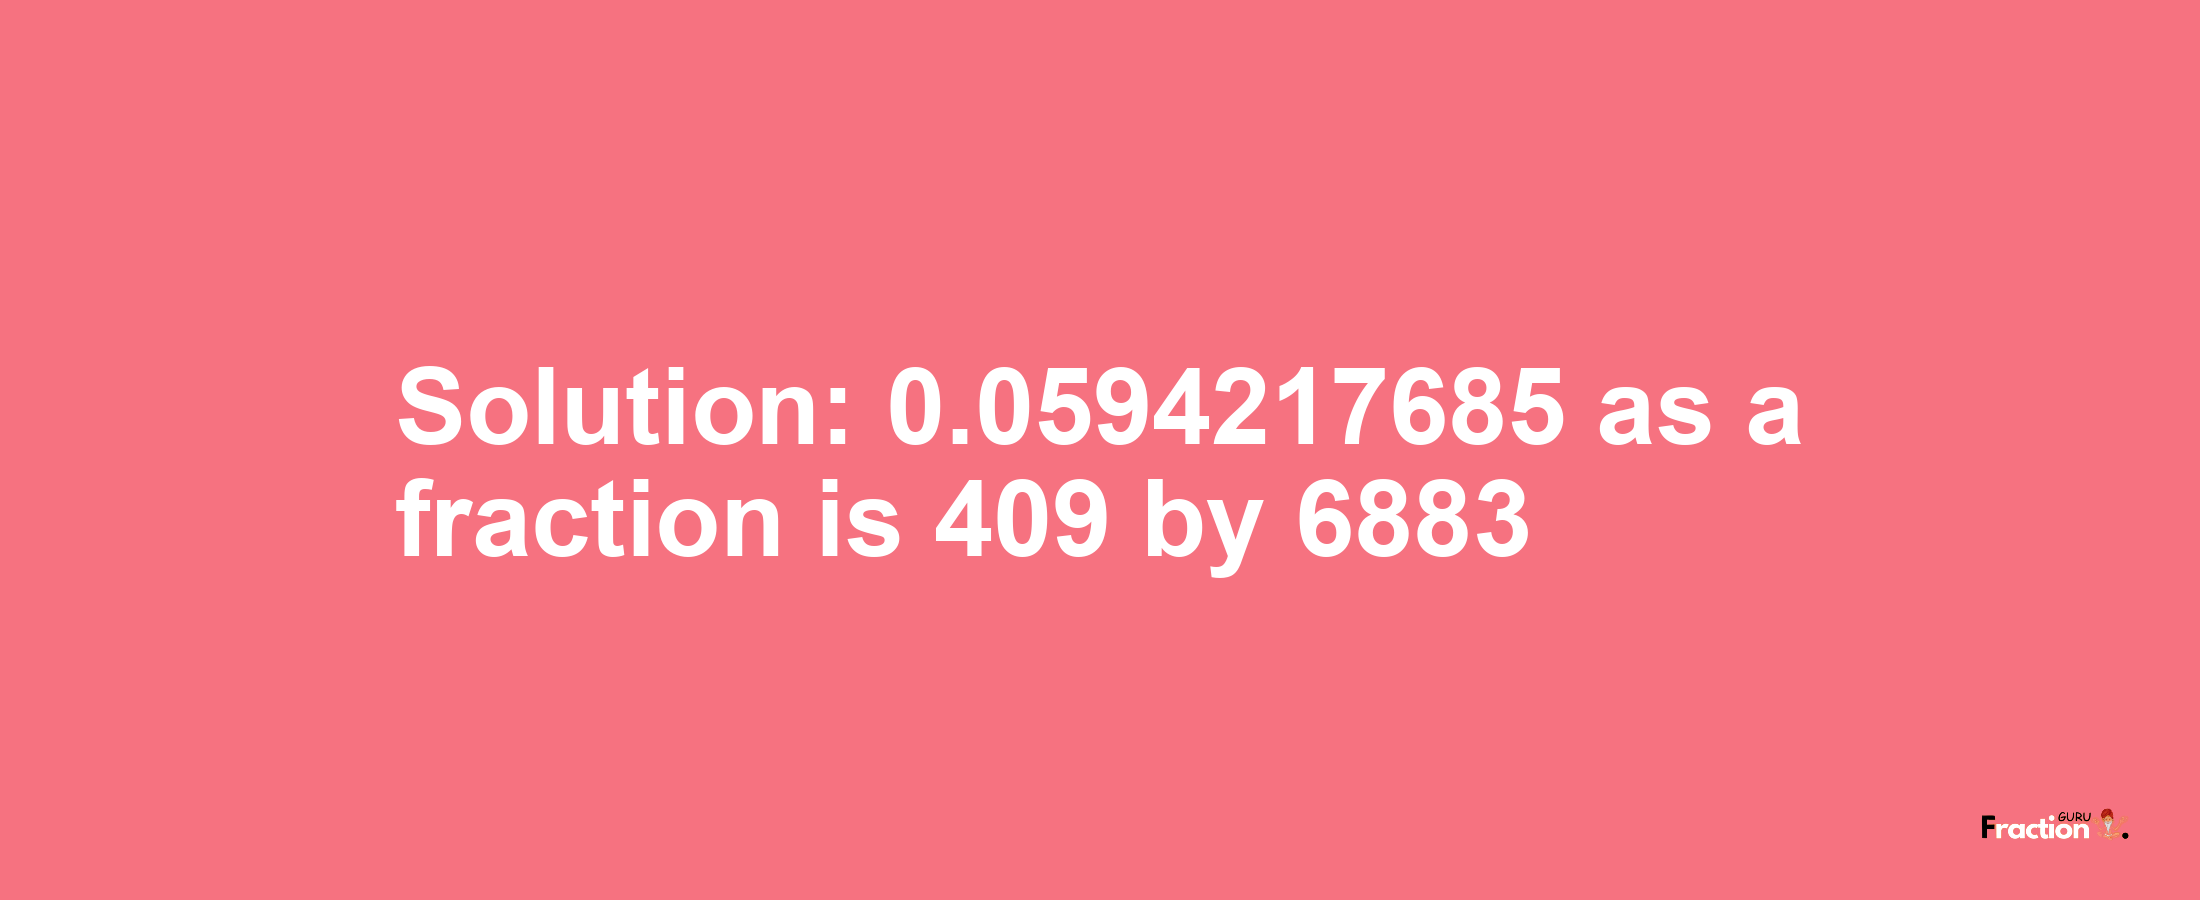 Solution:0.0594217685 as a fraction is 409/6883